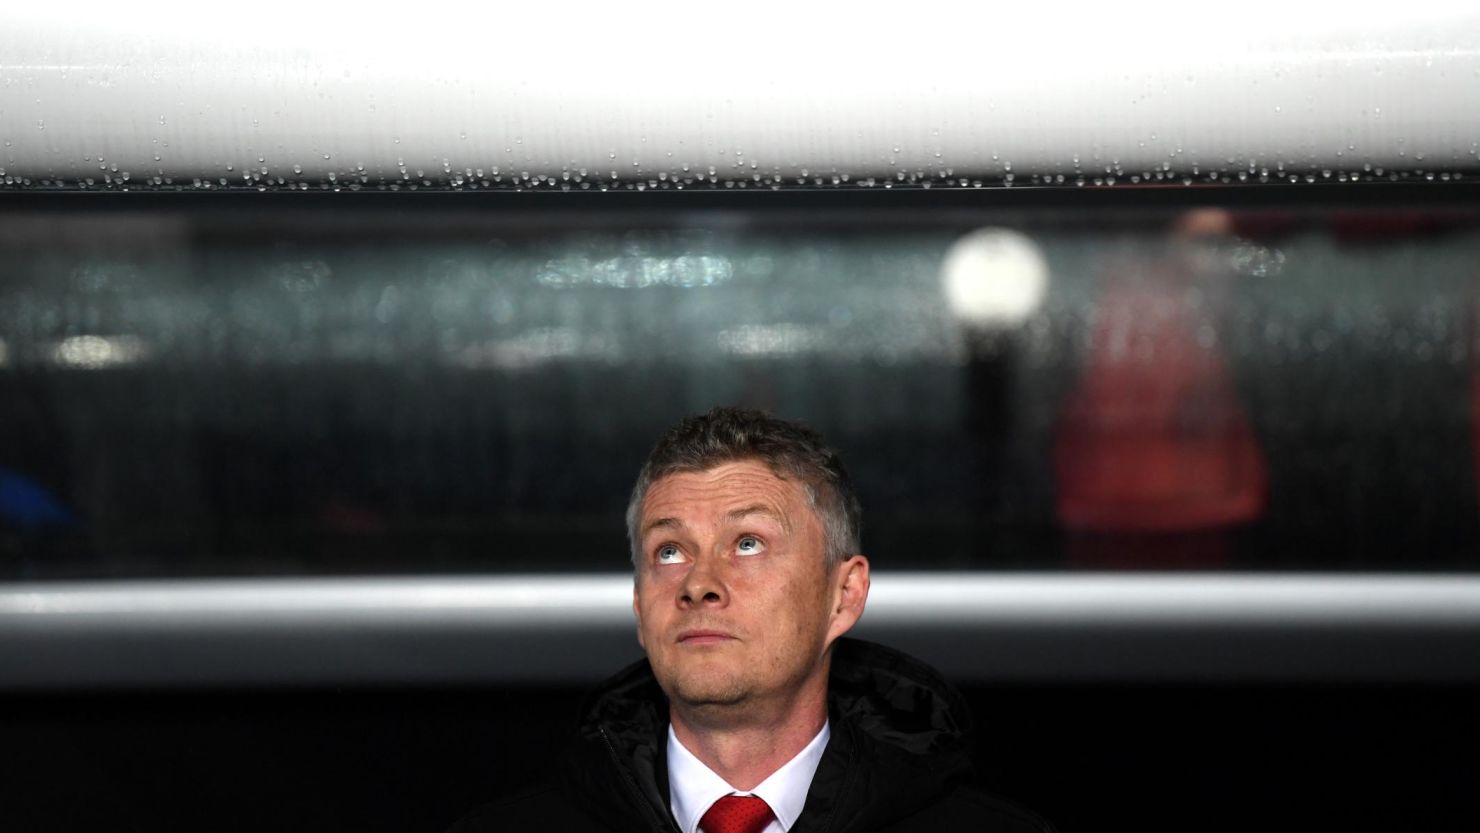 Ole Gunnar Solskjaer loses his first domestic game in charge of Manchester United